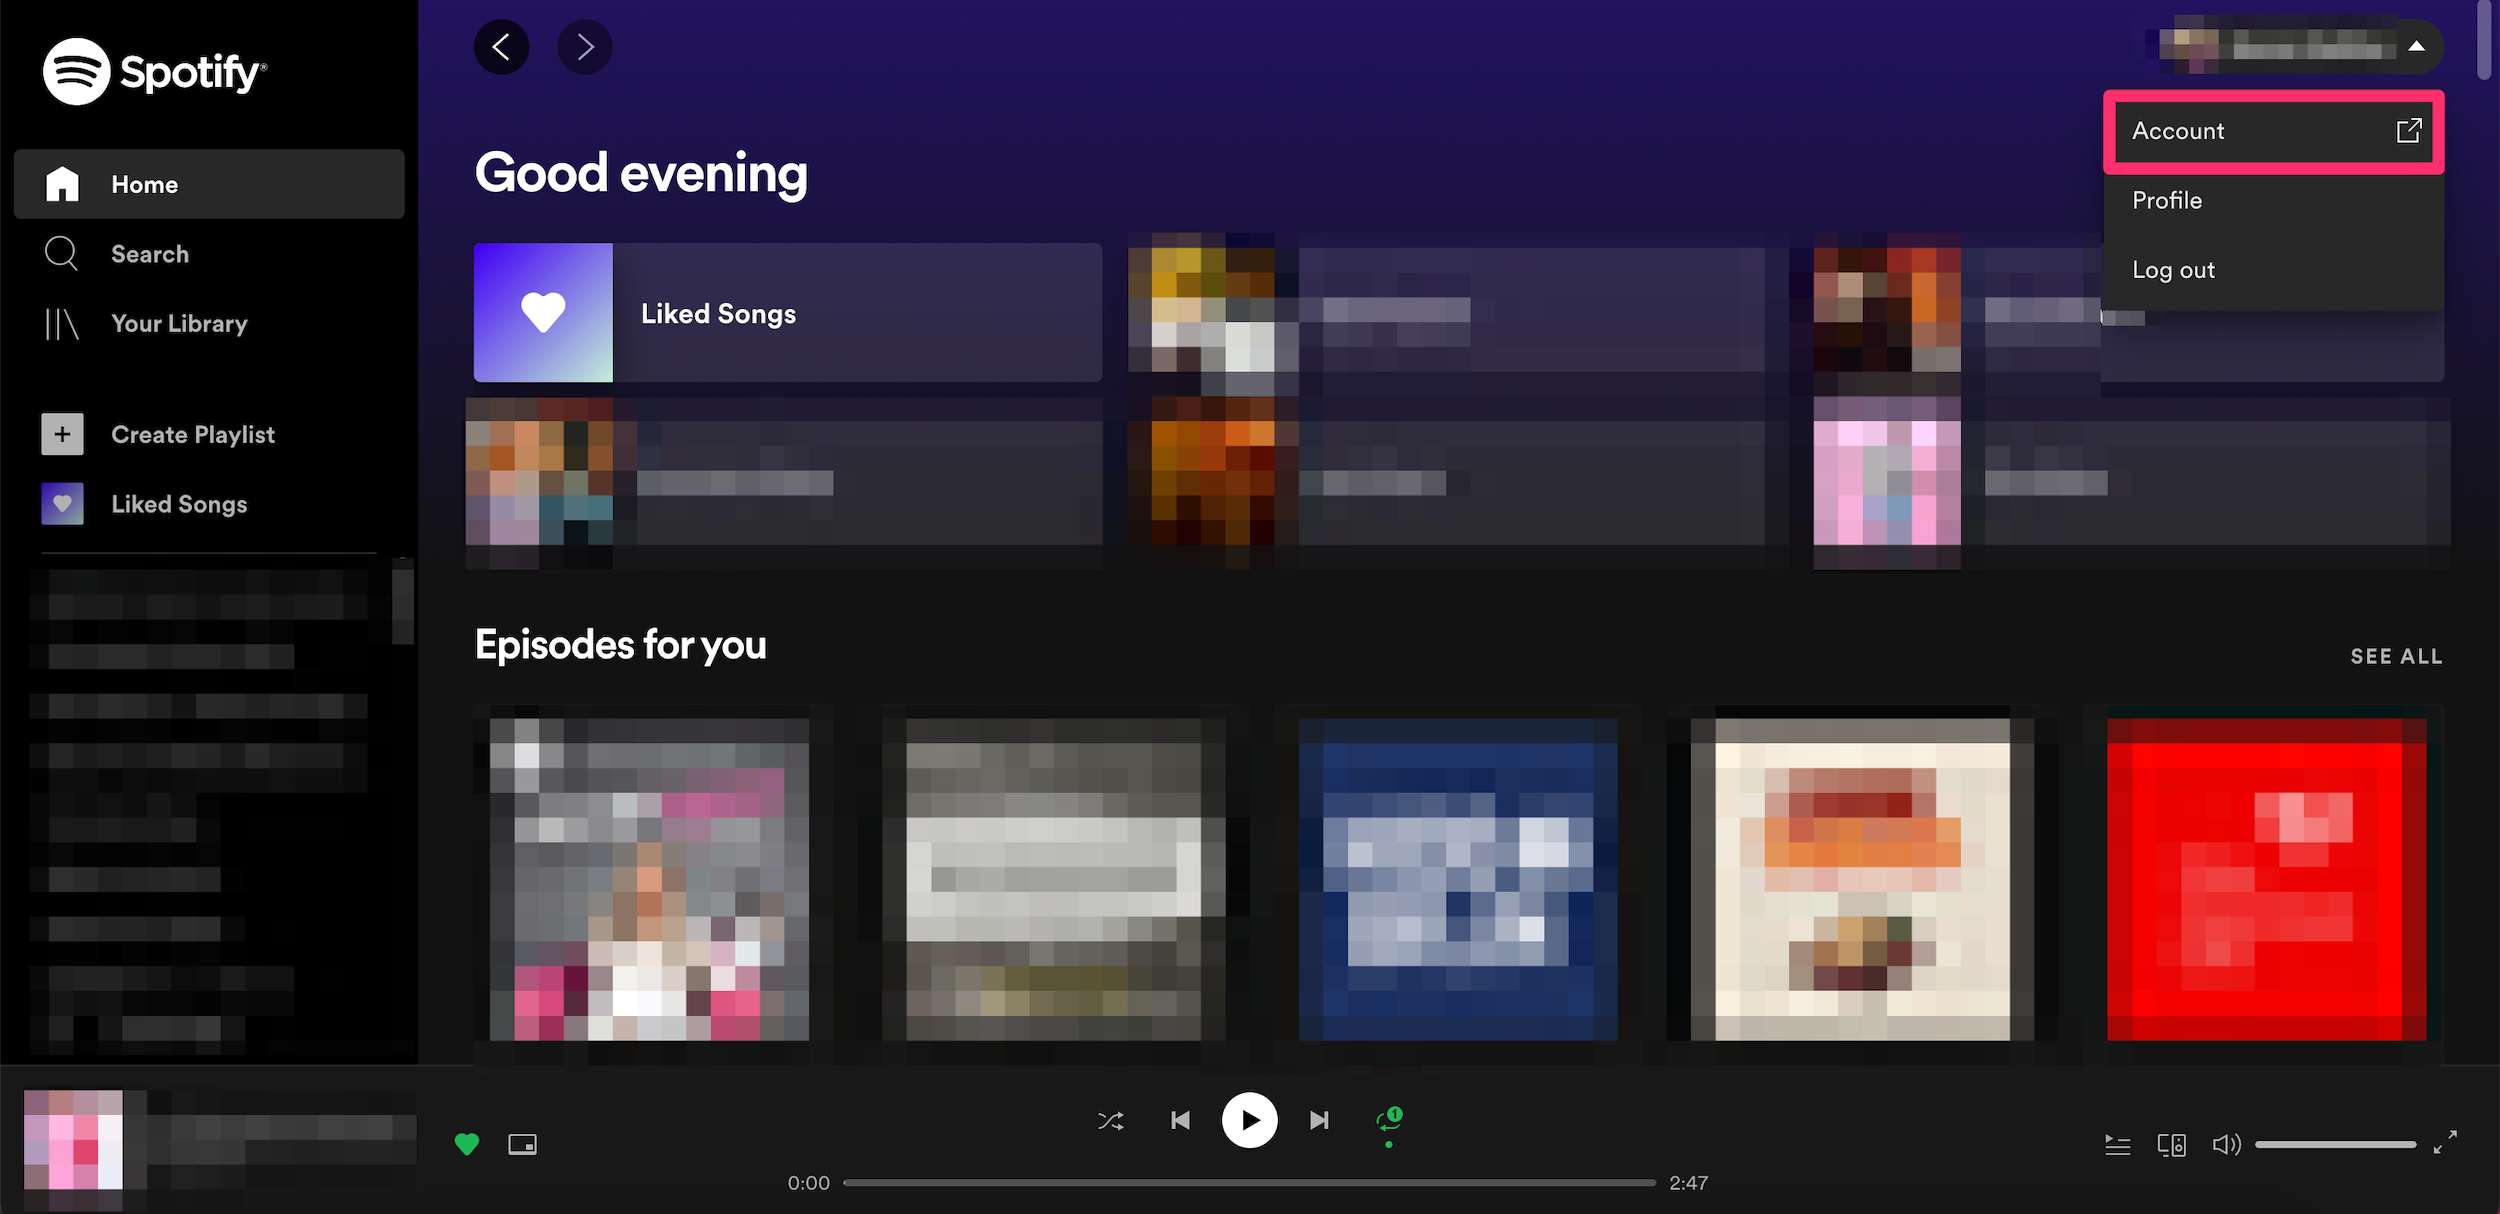 Screenshot showing the expanded Profile menu in the Spotify website